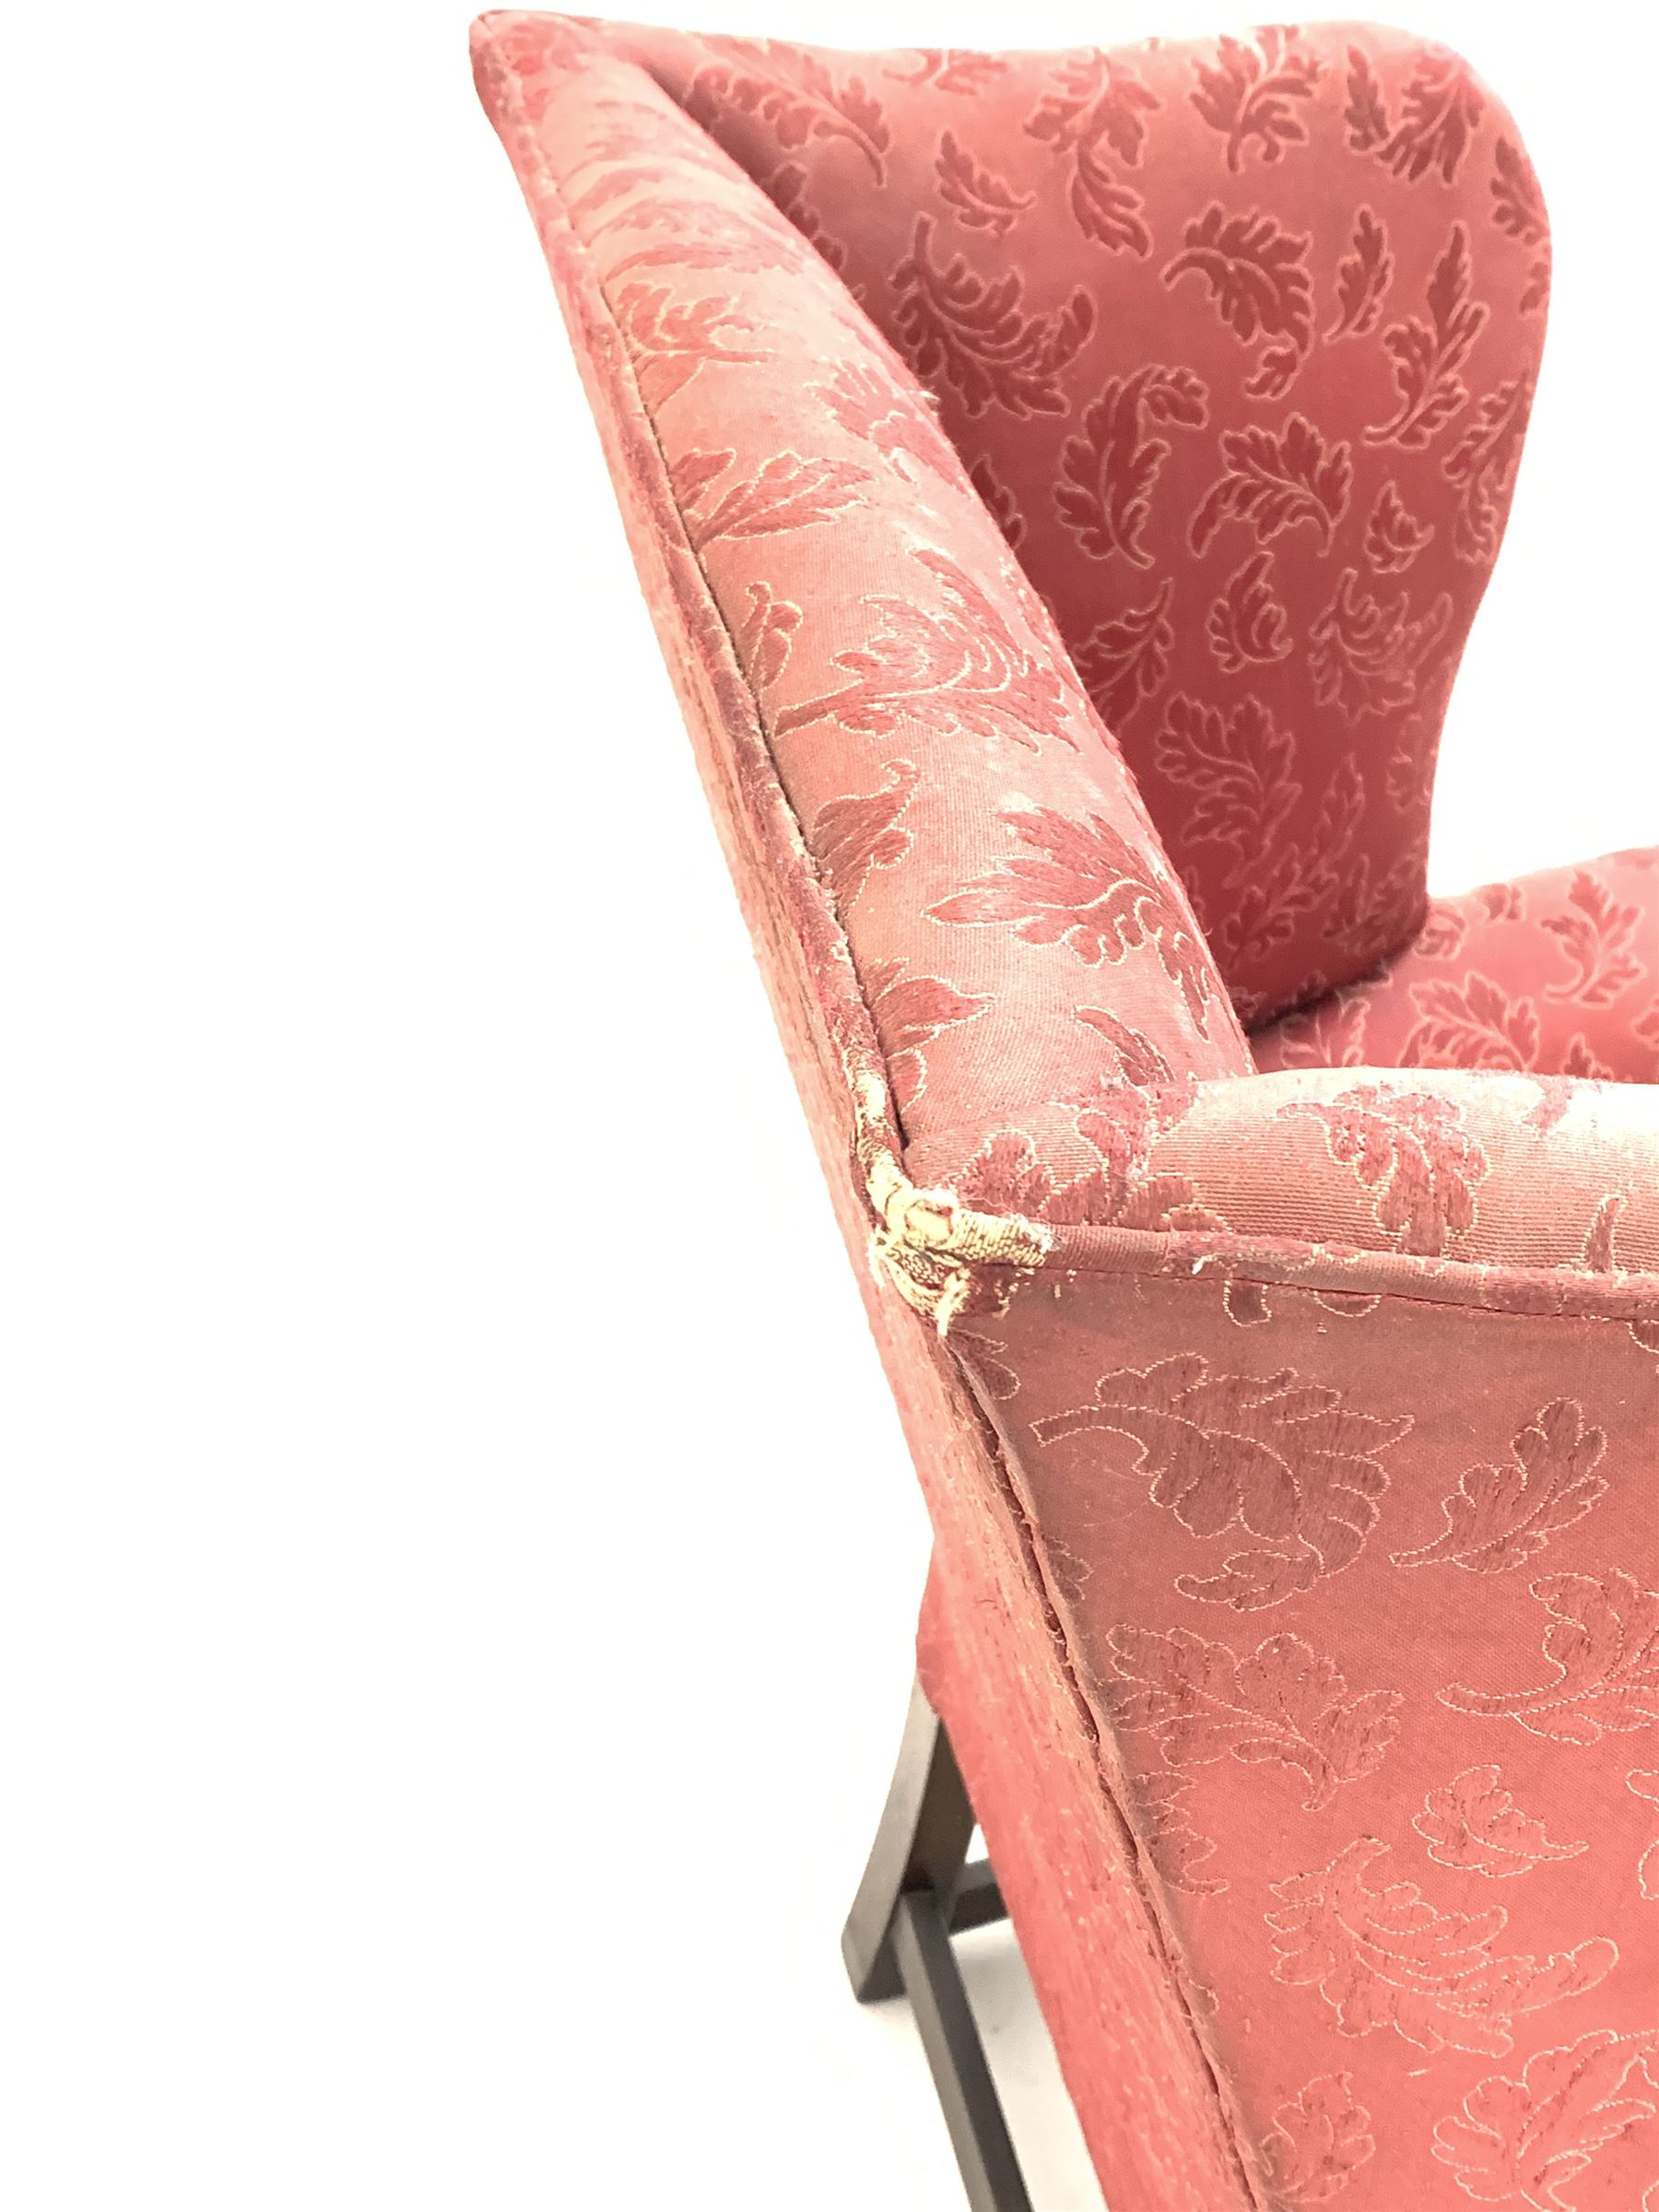 Georgian style high wing back armchair upholstered in claret red floral fabric - Image 5 of 5